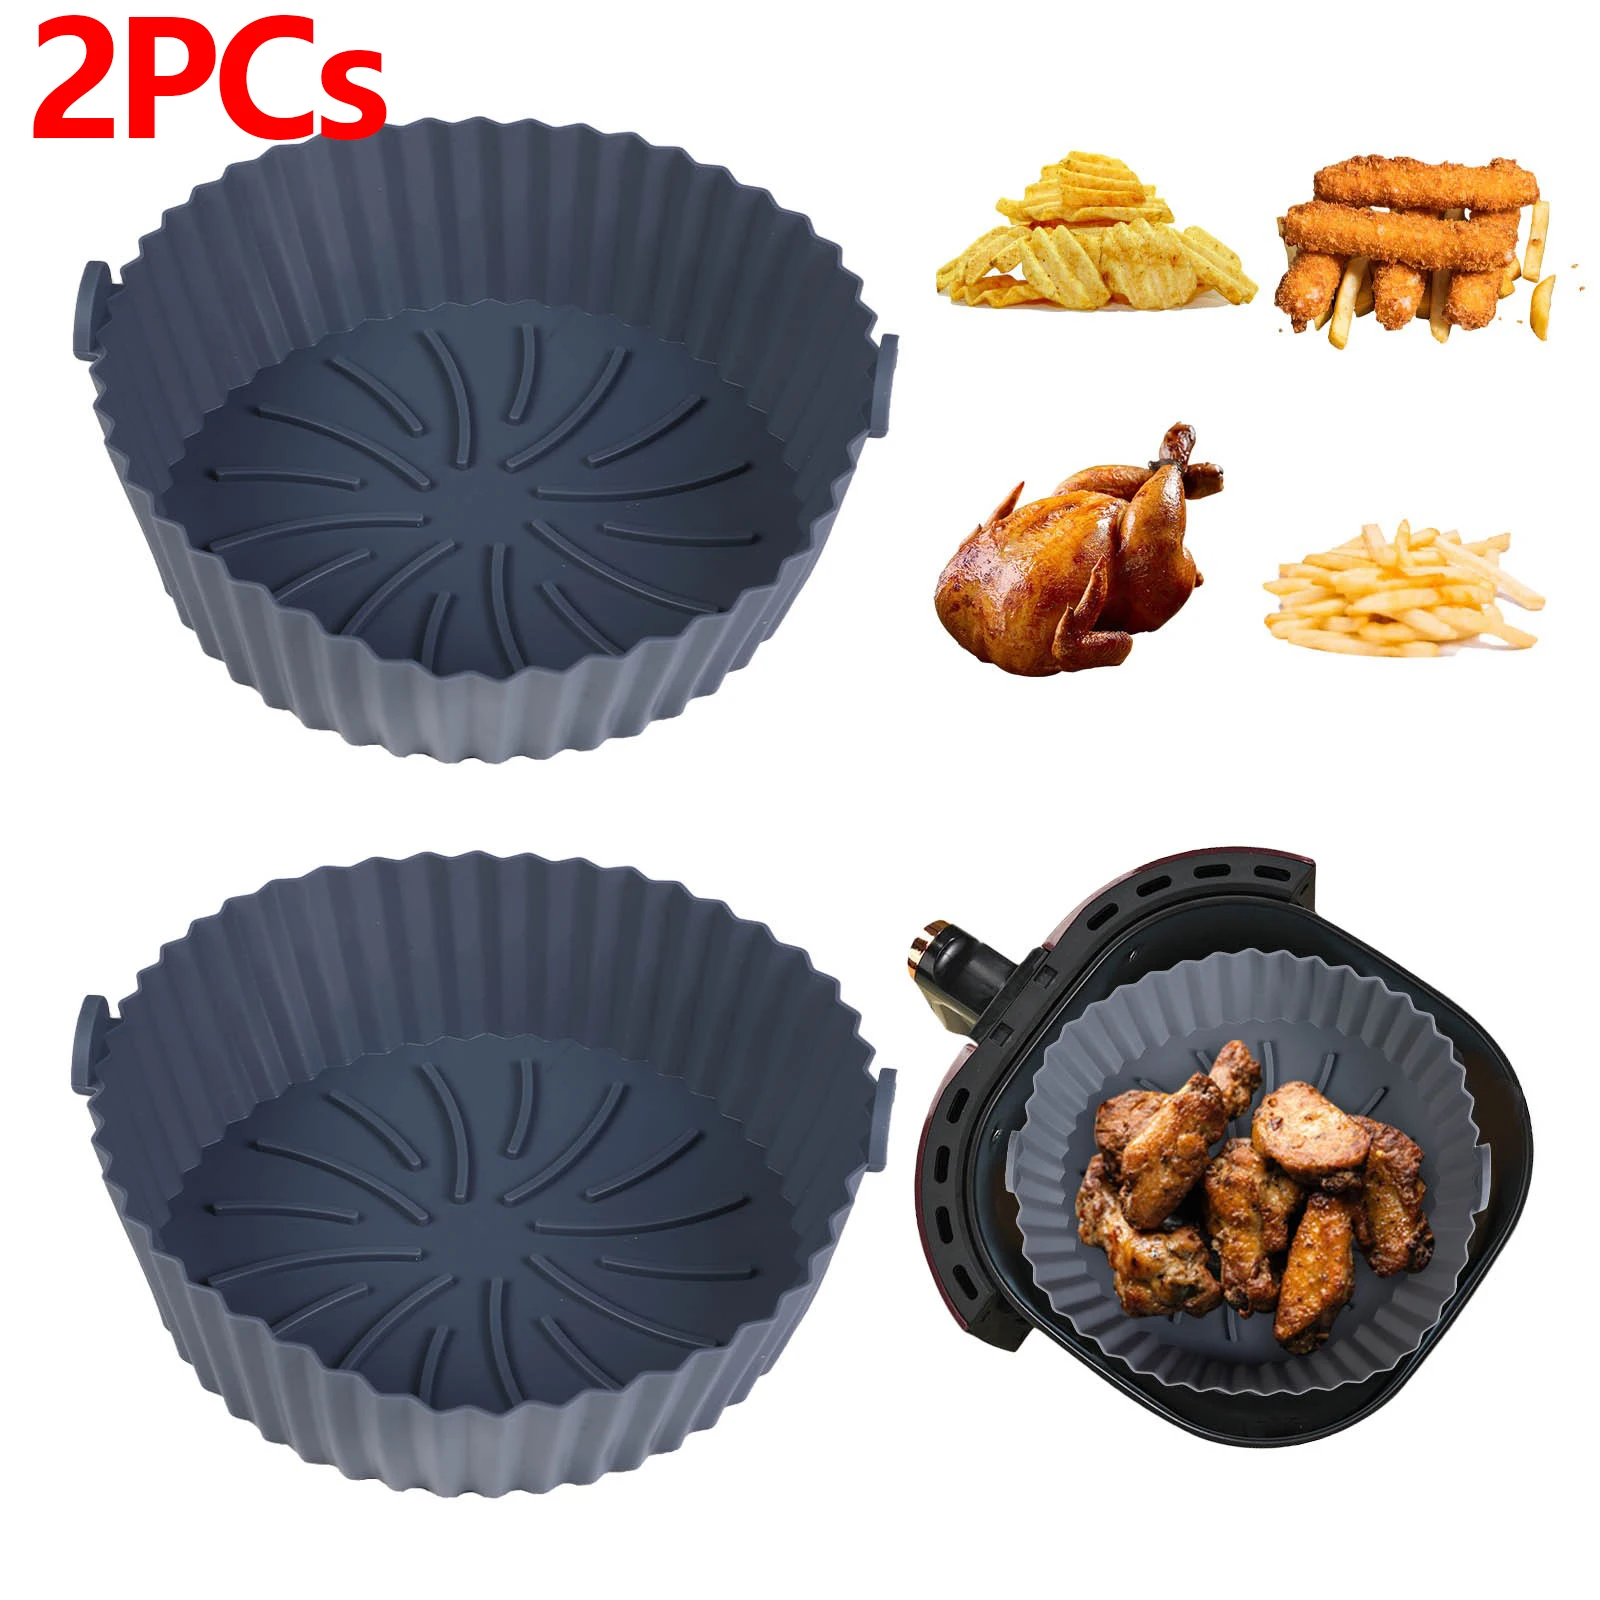 2pcs Air Fryer Silicone Tray Oven Baking Tray Pizza Fried Chicken Baking Tool Reusable Liner Easy To Clean Airfryer Basket